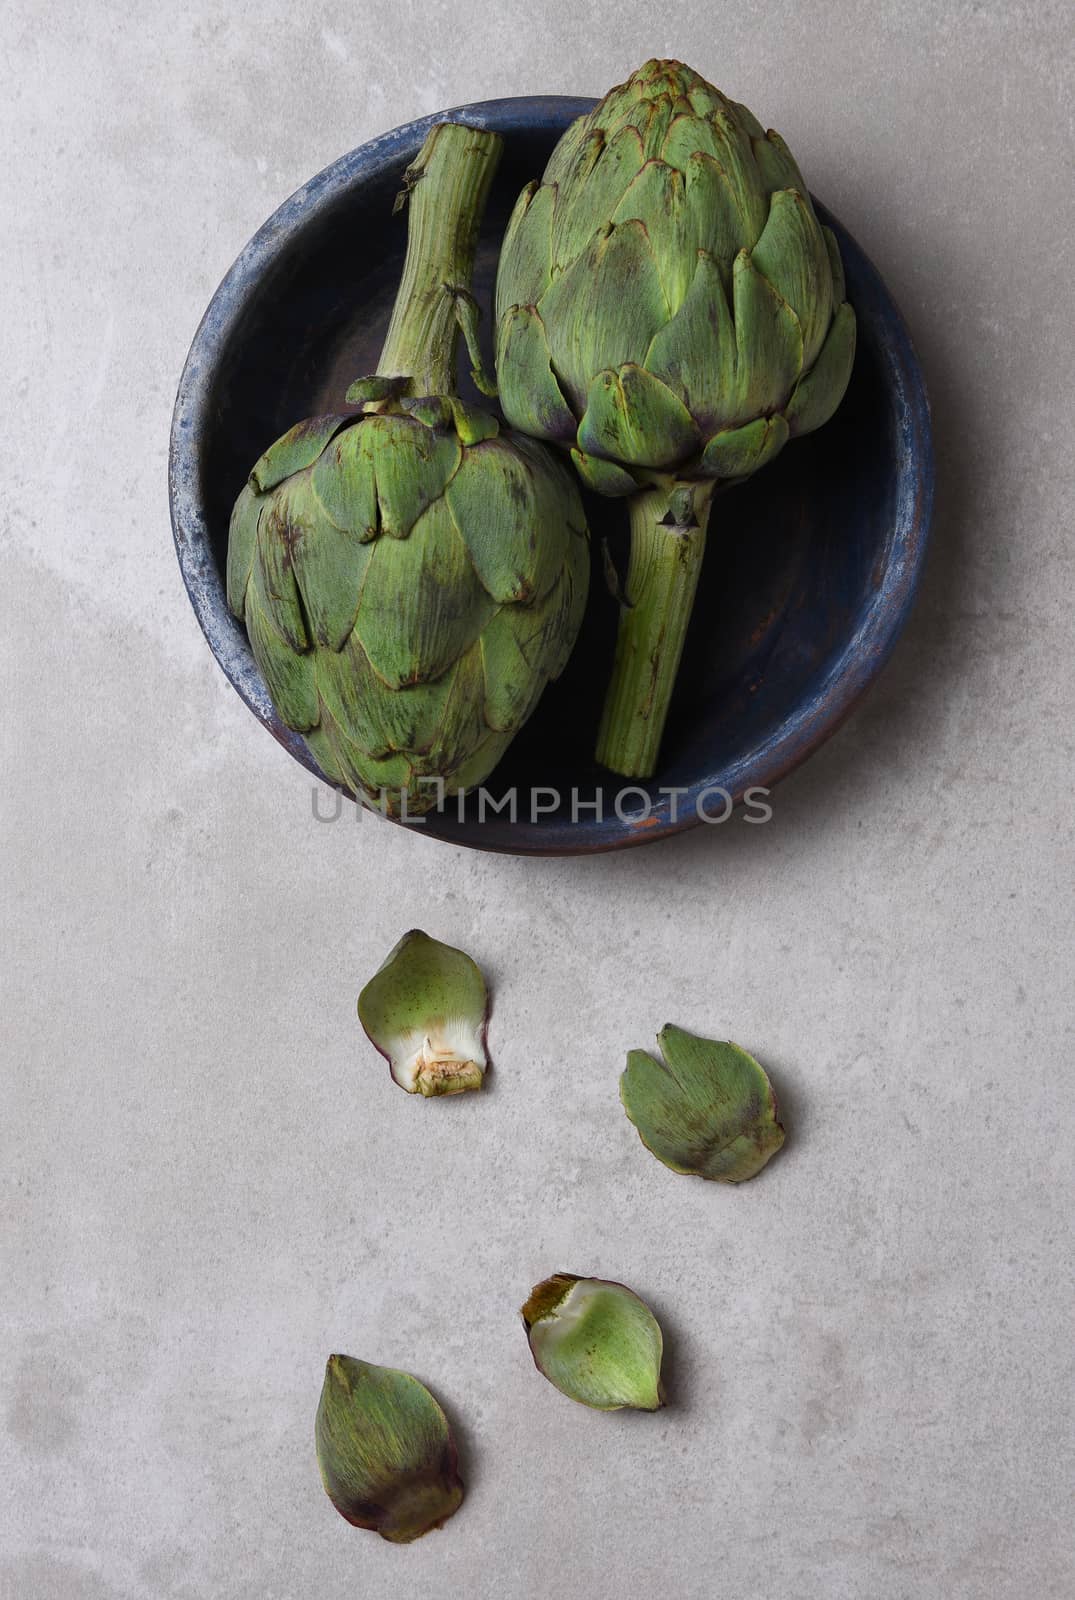 Artichokes: Top view of two artichokes on blue plate on gray background.